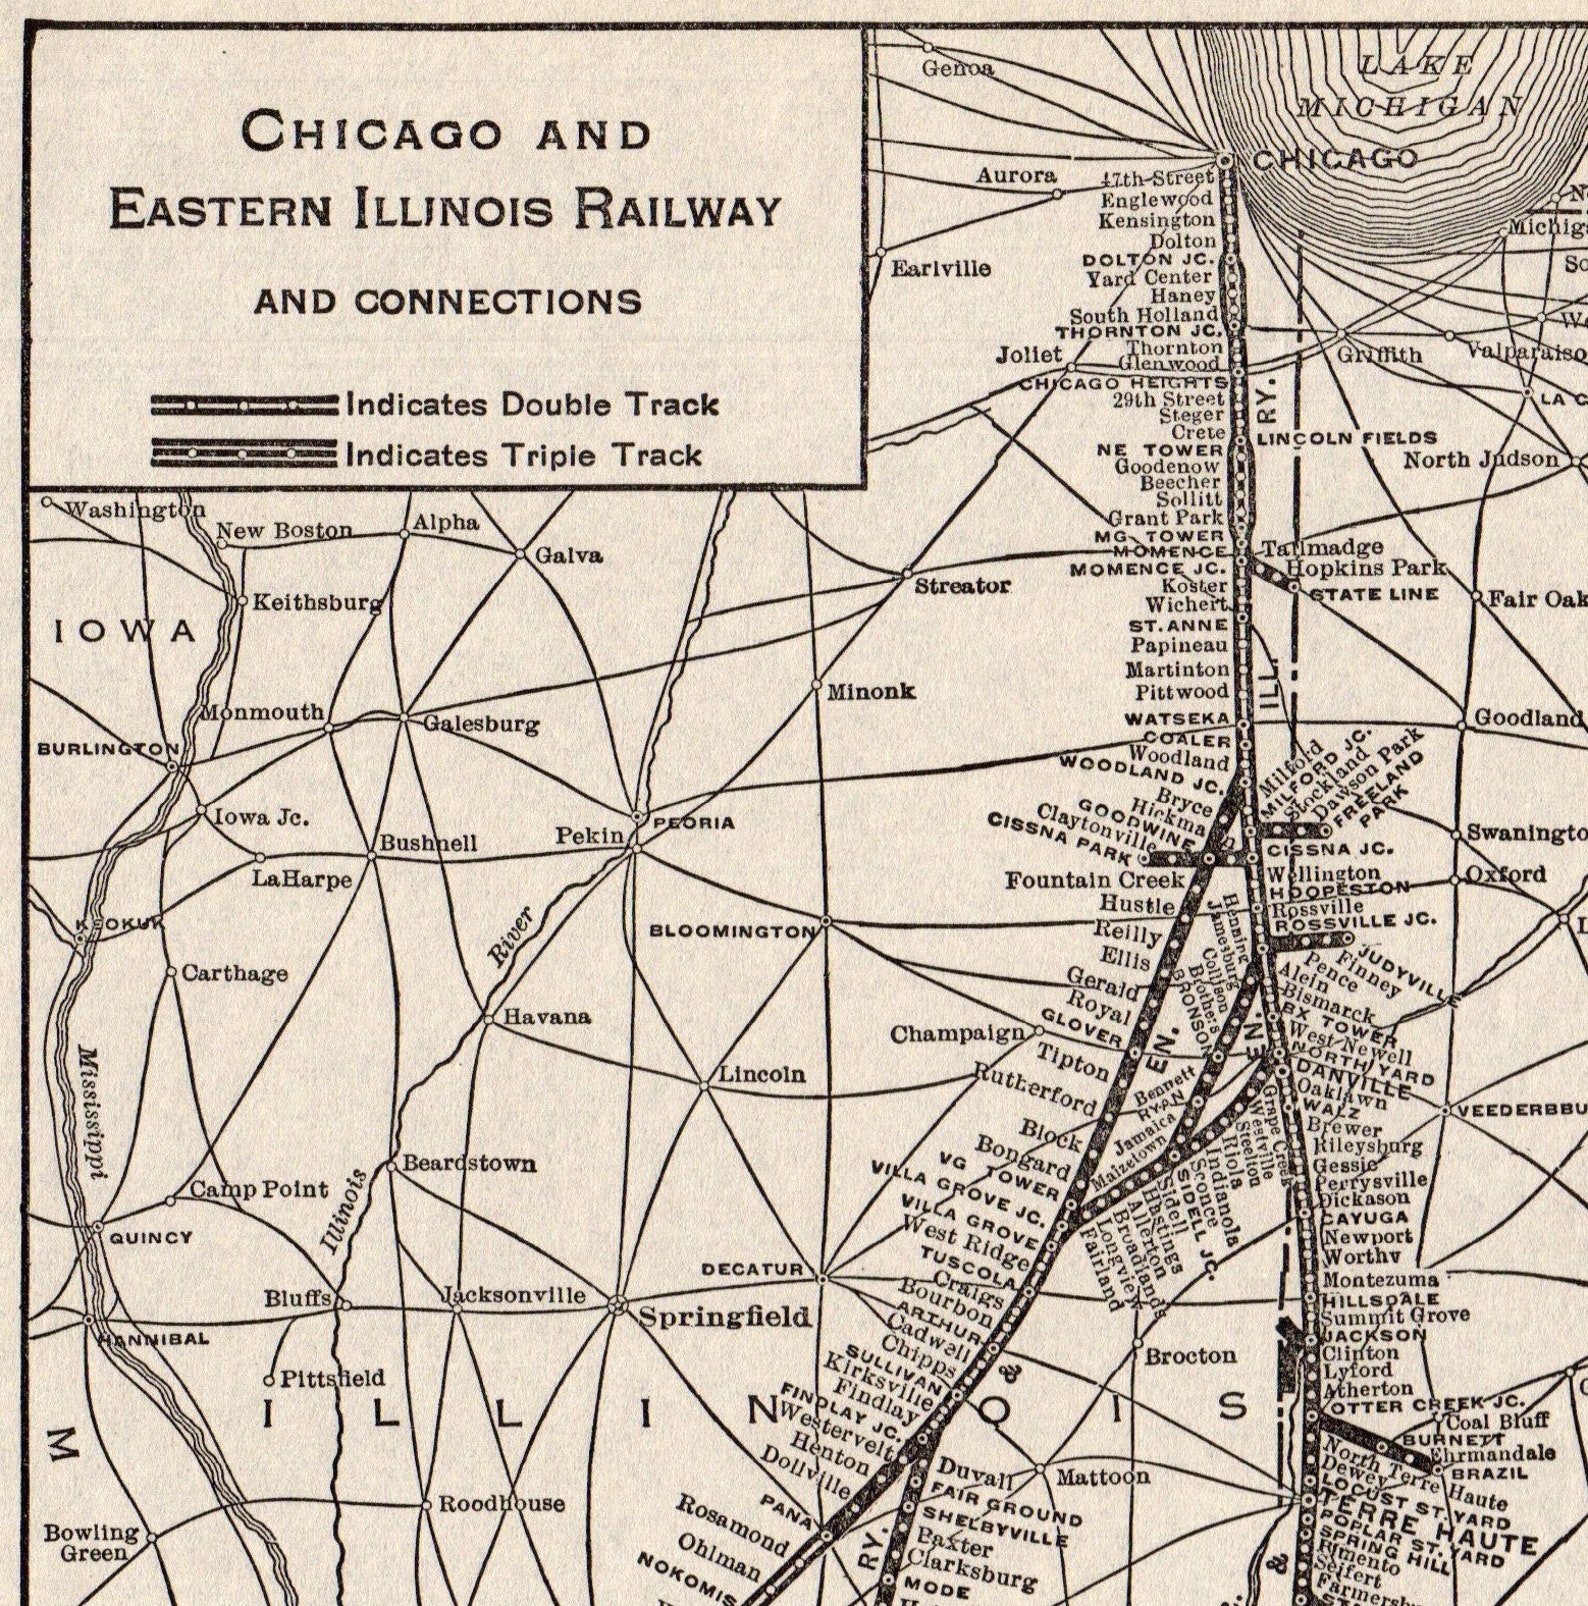 1935 Antique Chicago And Eastern Illinois Railway Map Chaffee Etsy